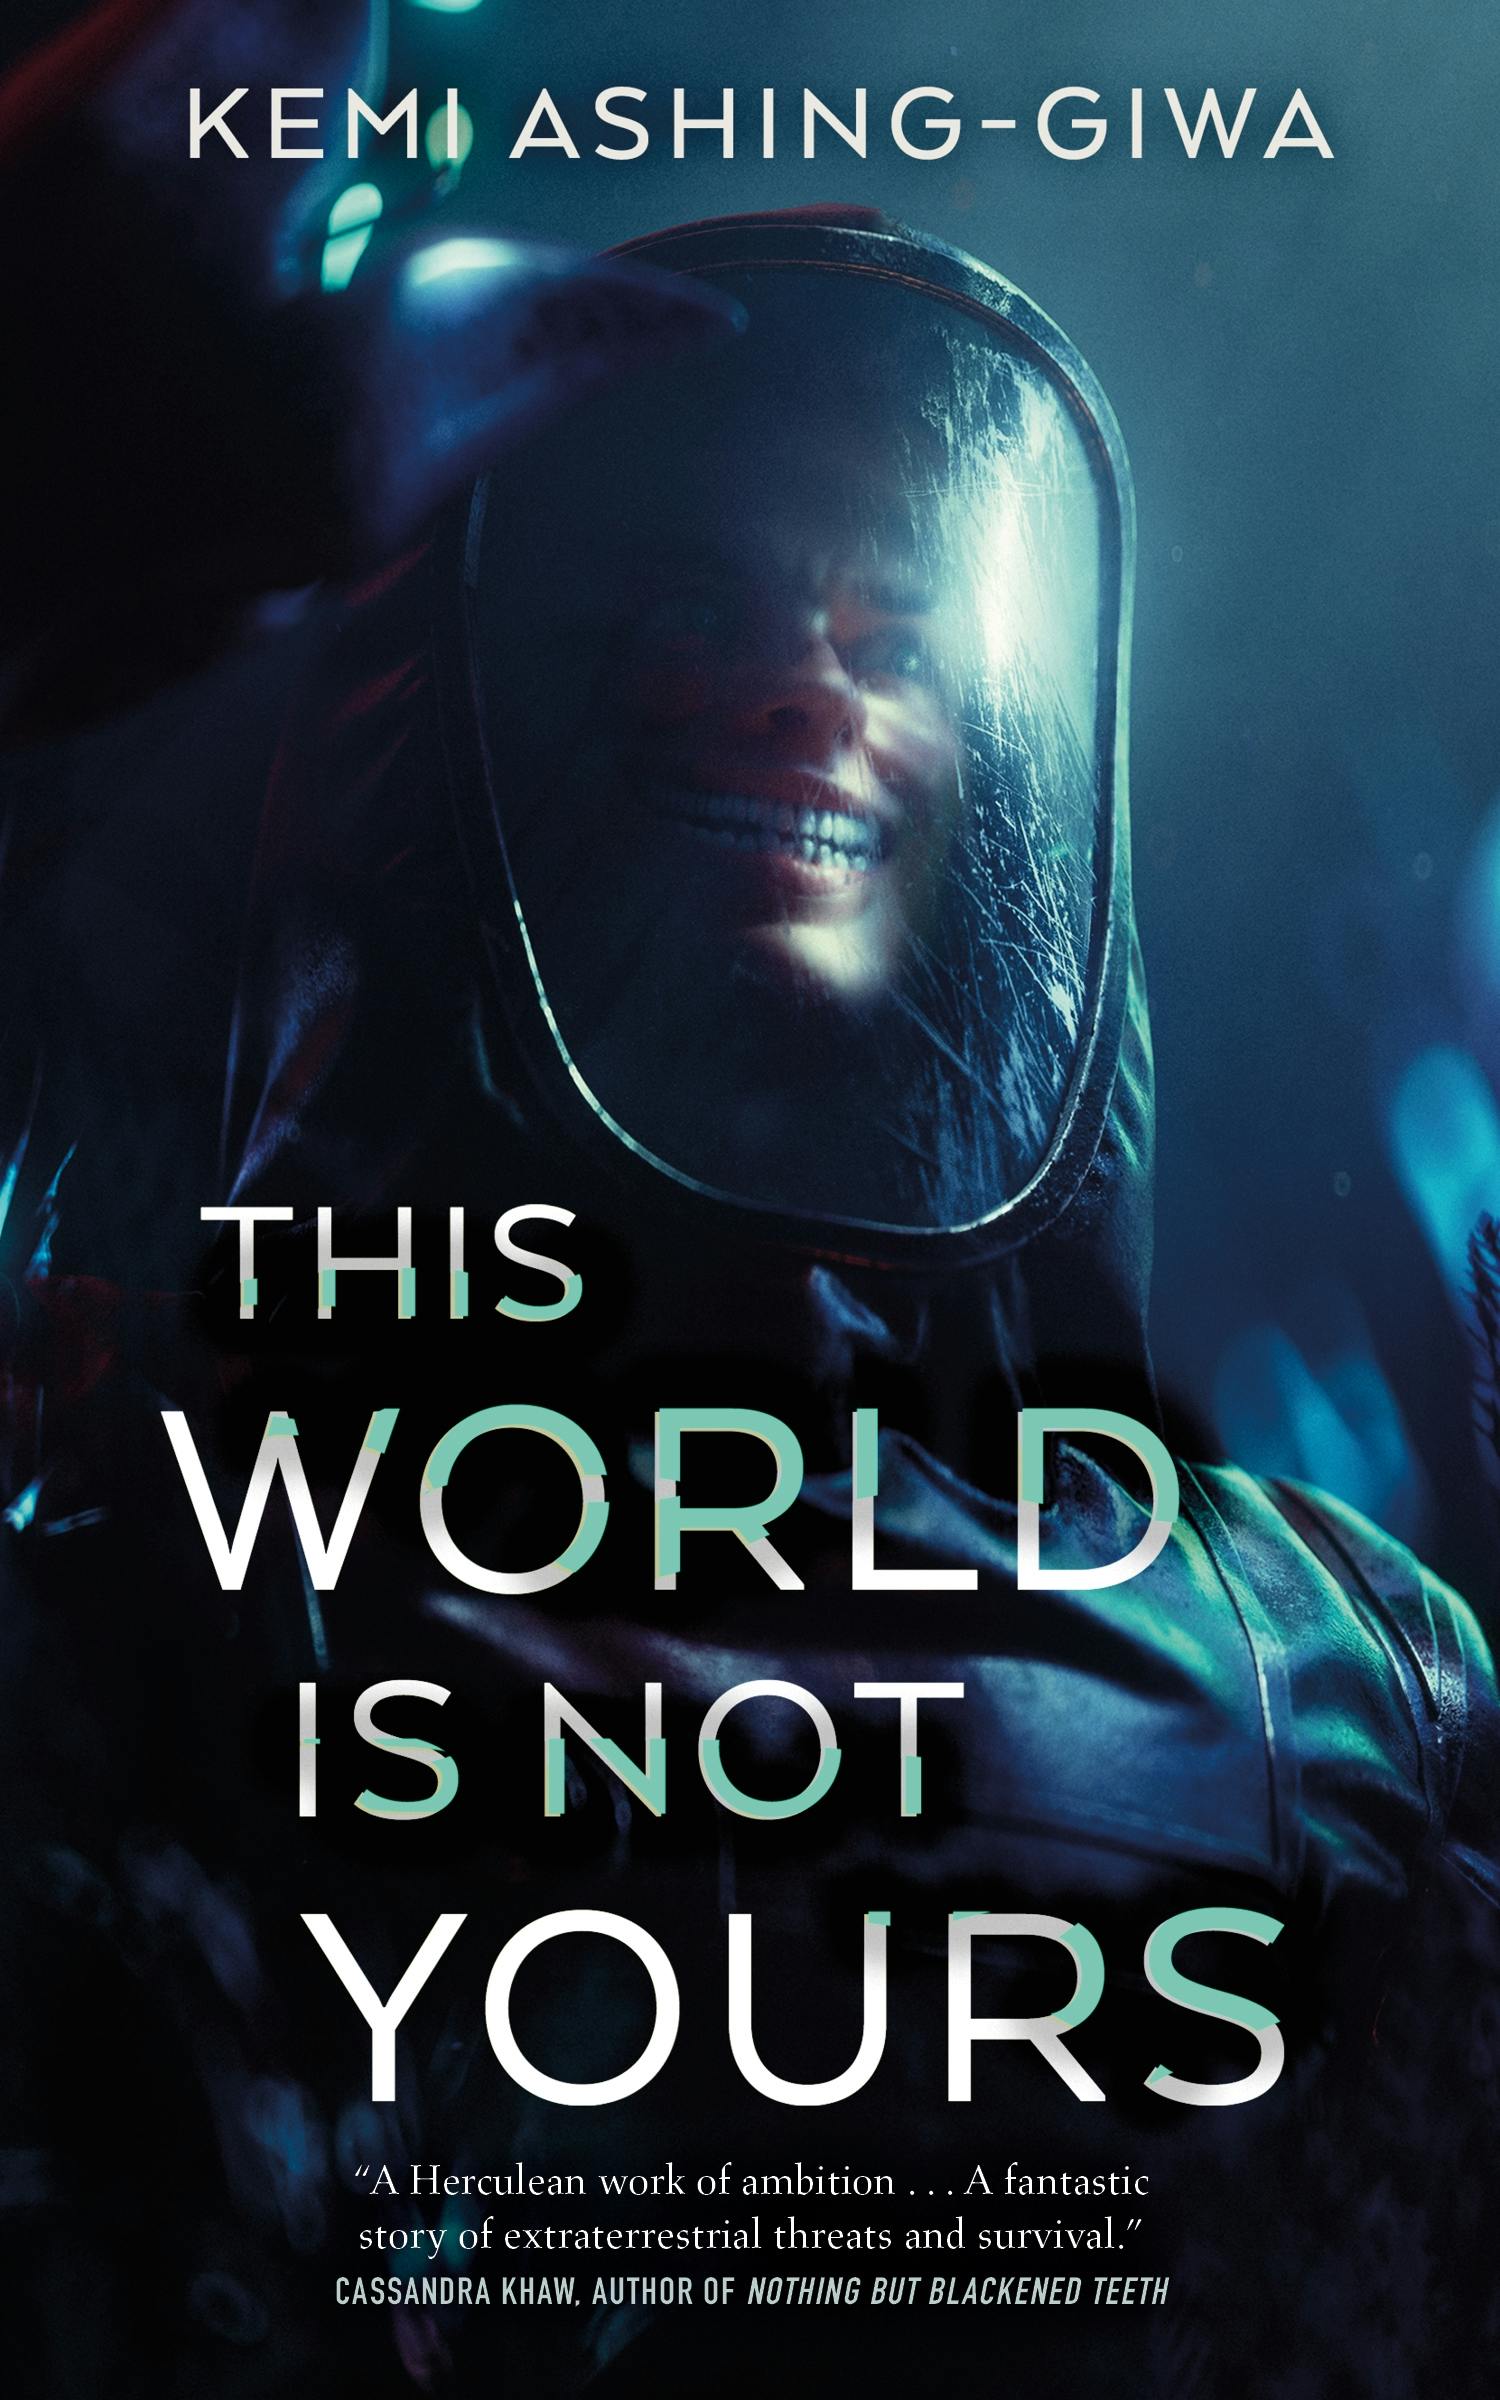 Cover for the book titled as: This World Is Not Yours